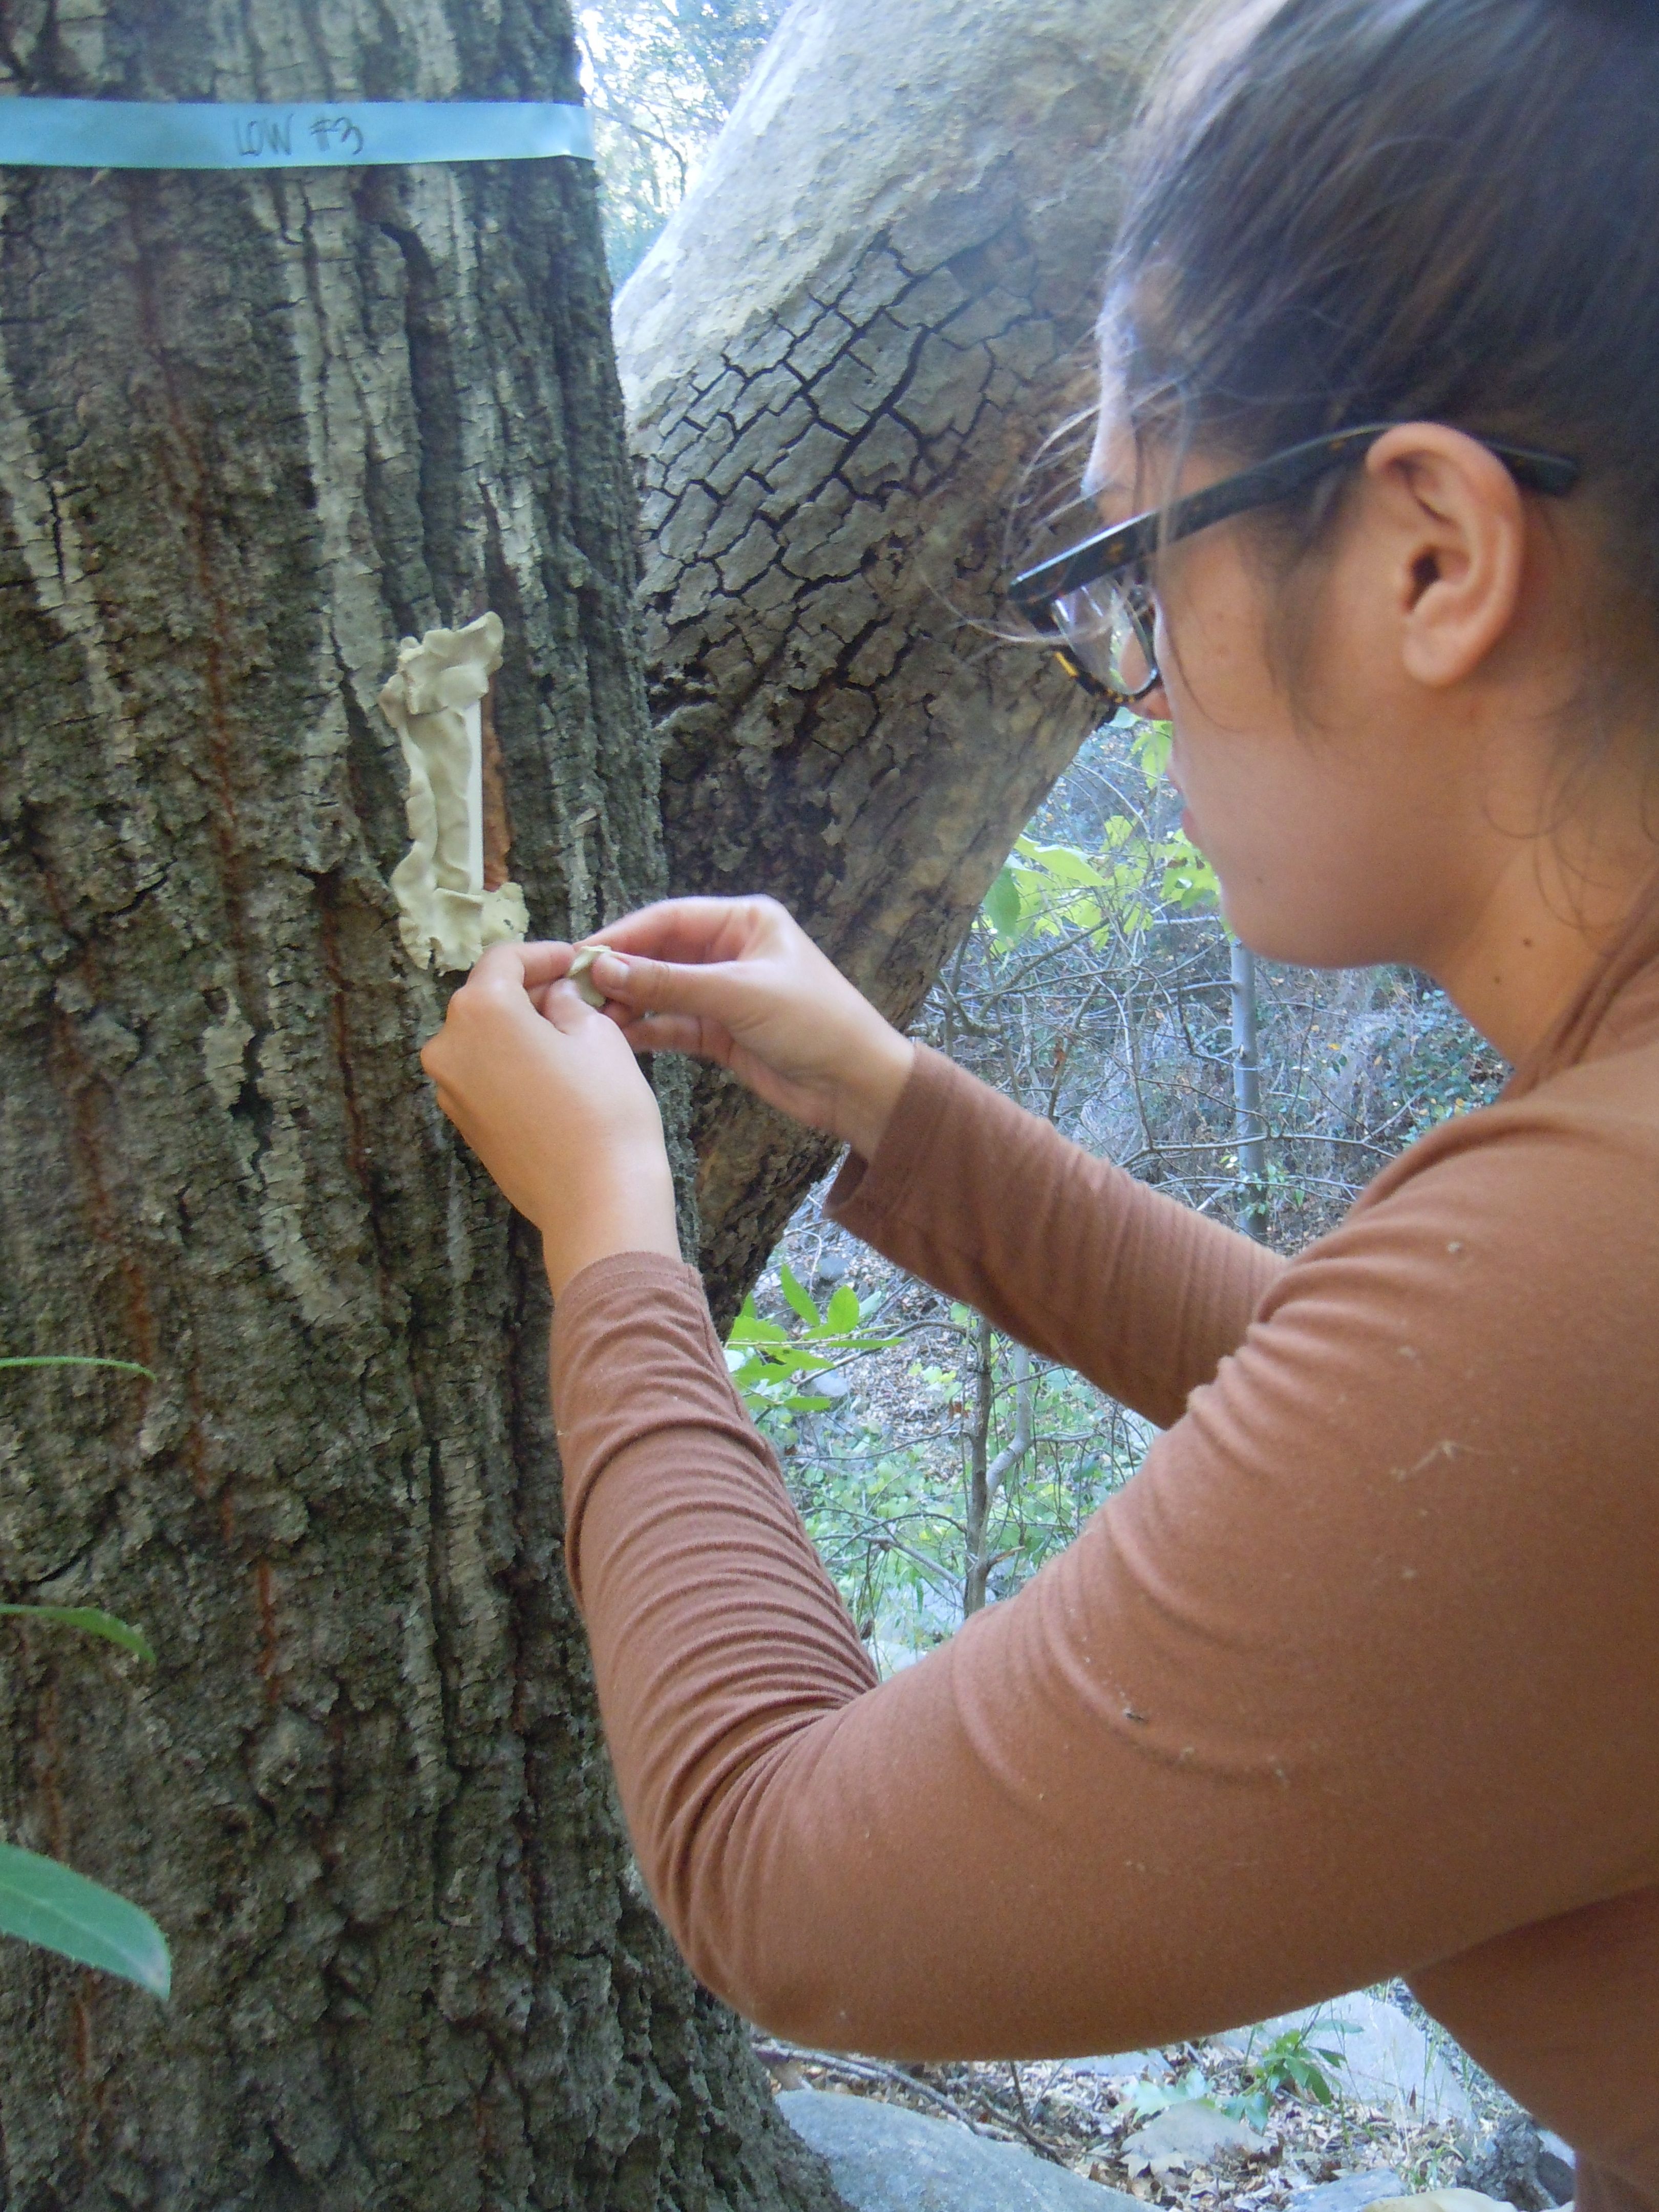 Student conducting research in the field